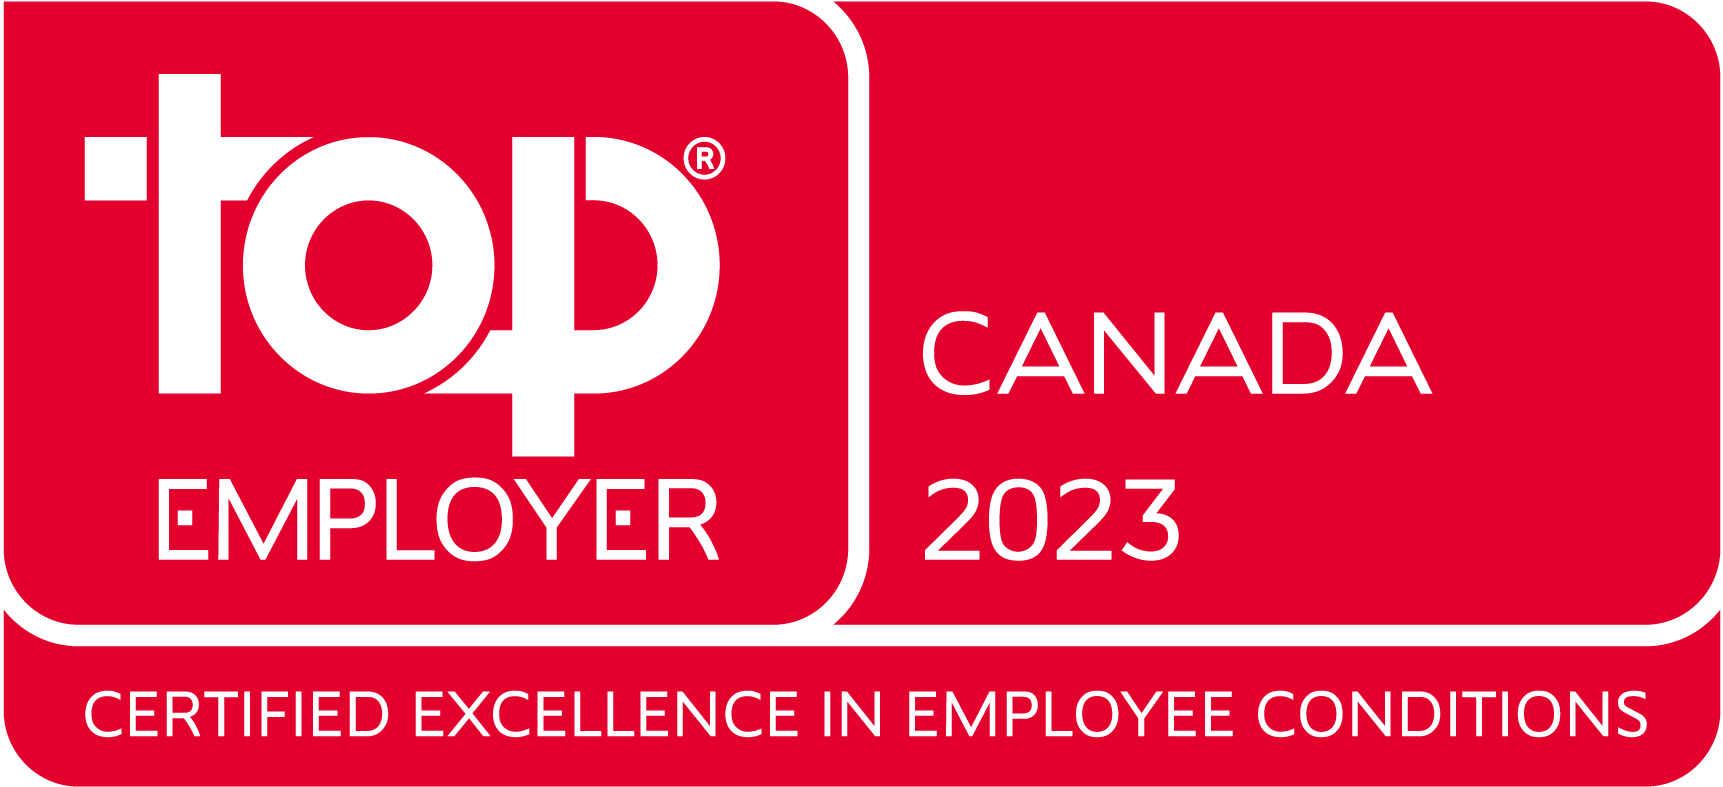 Top Employer 2023 in Canada